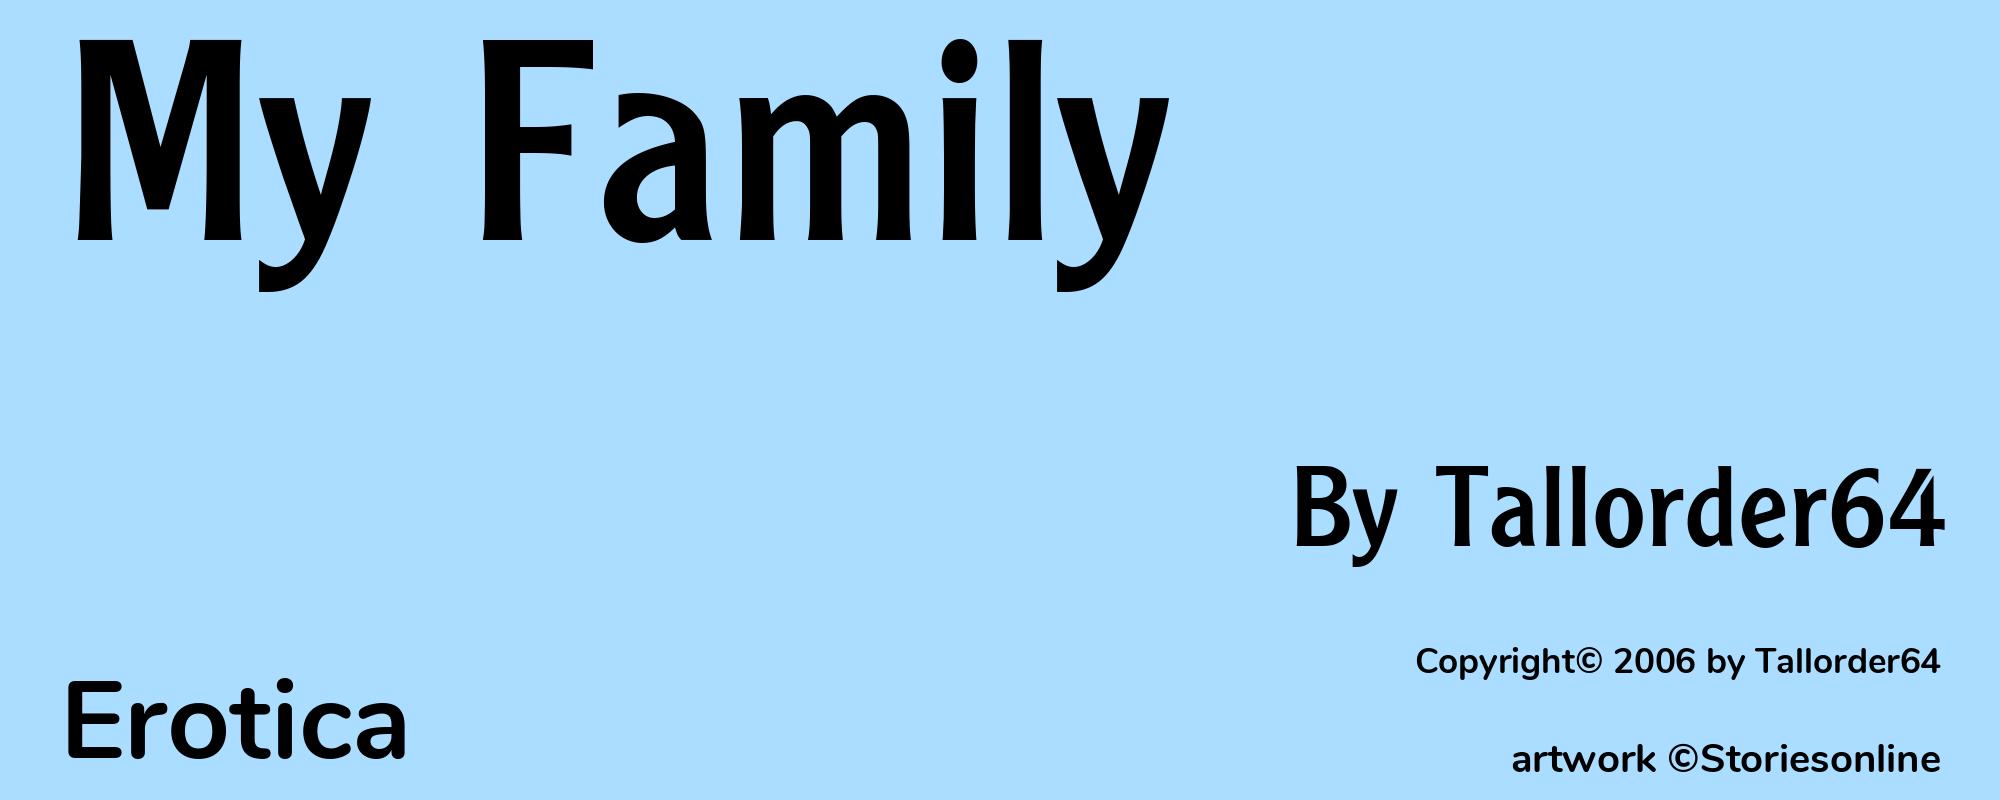 My Family - Cover